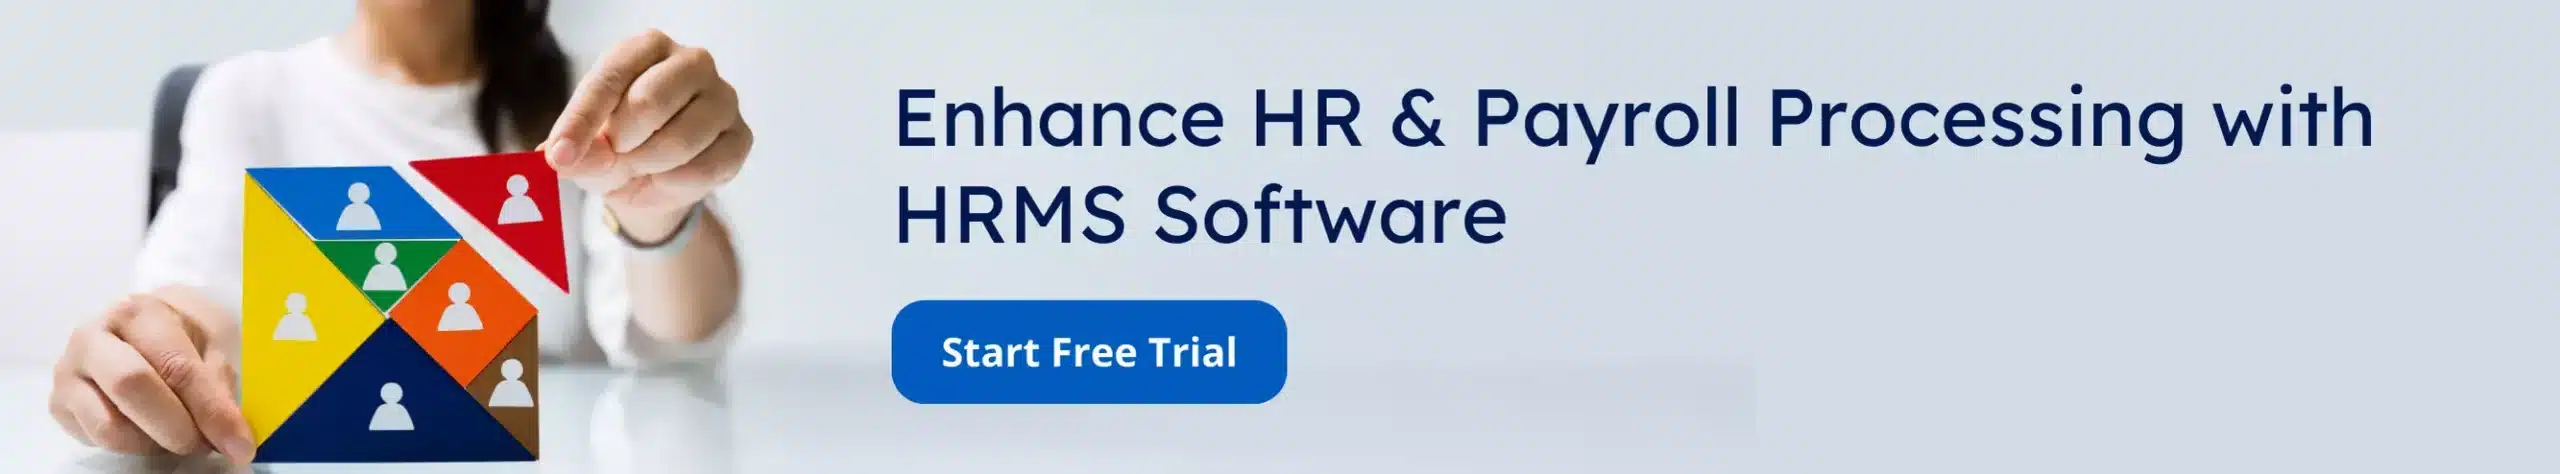 Enhance HR Payroll Processing with HRMS Software